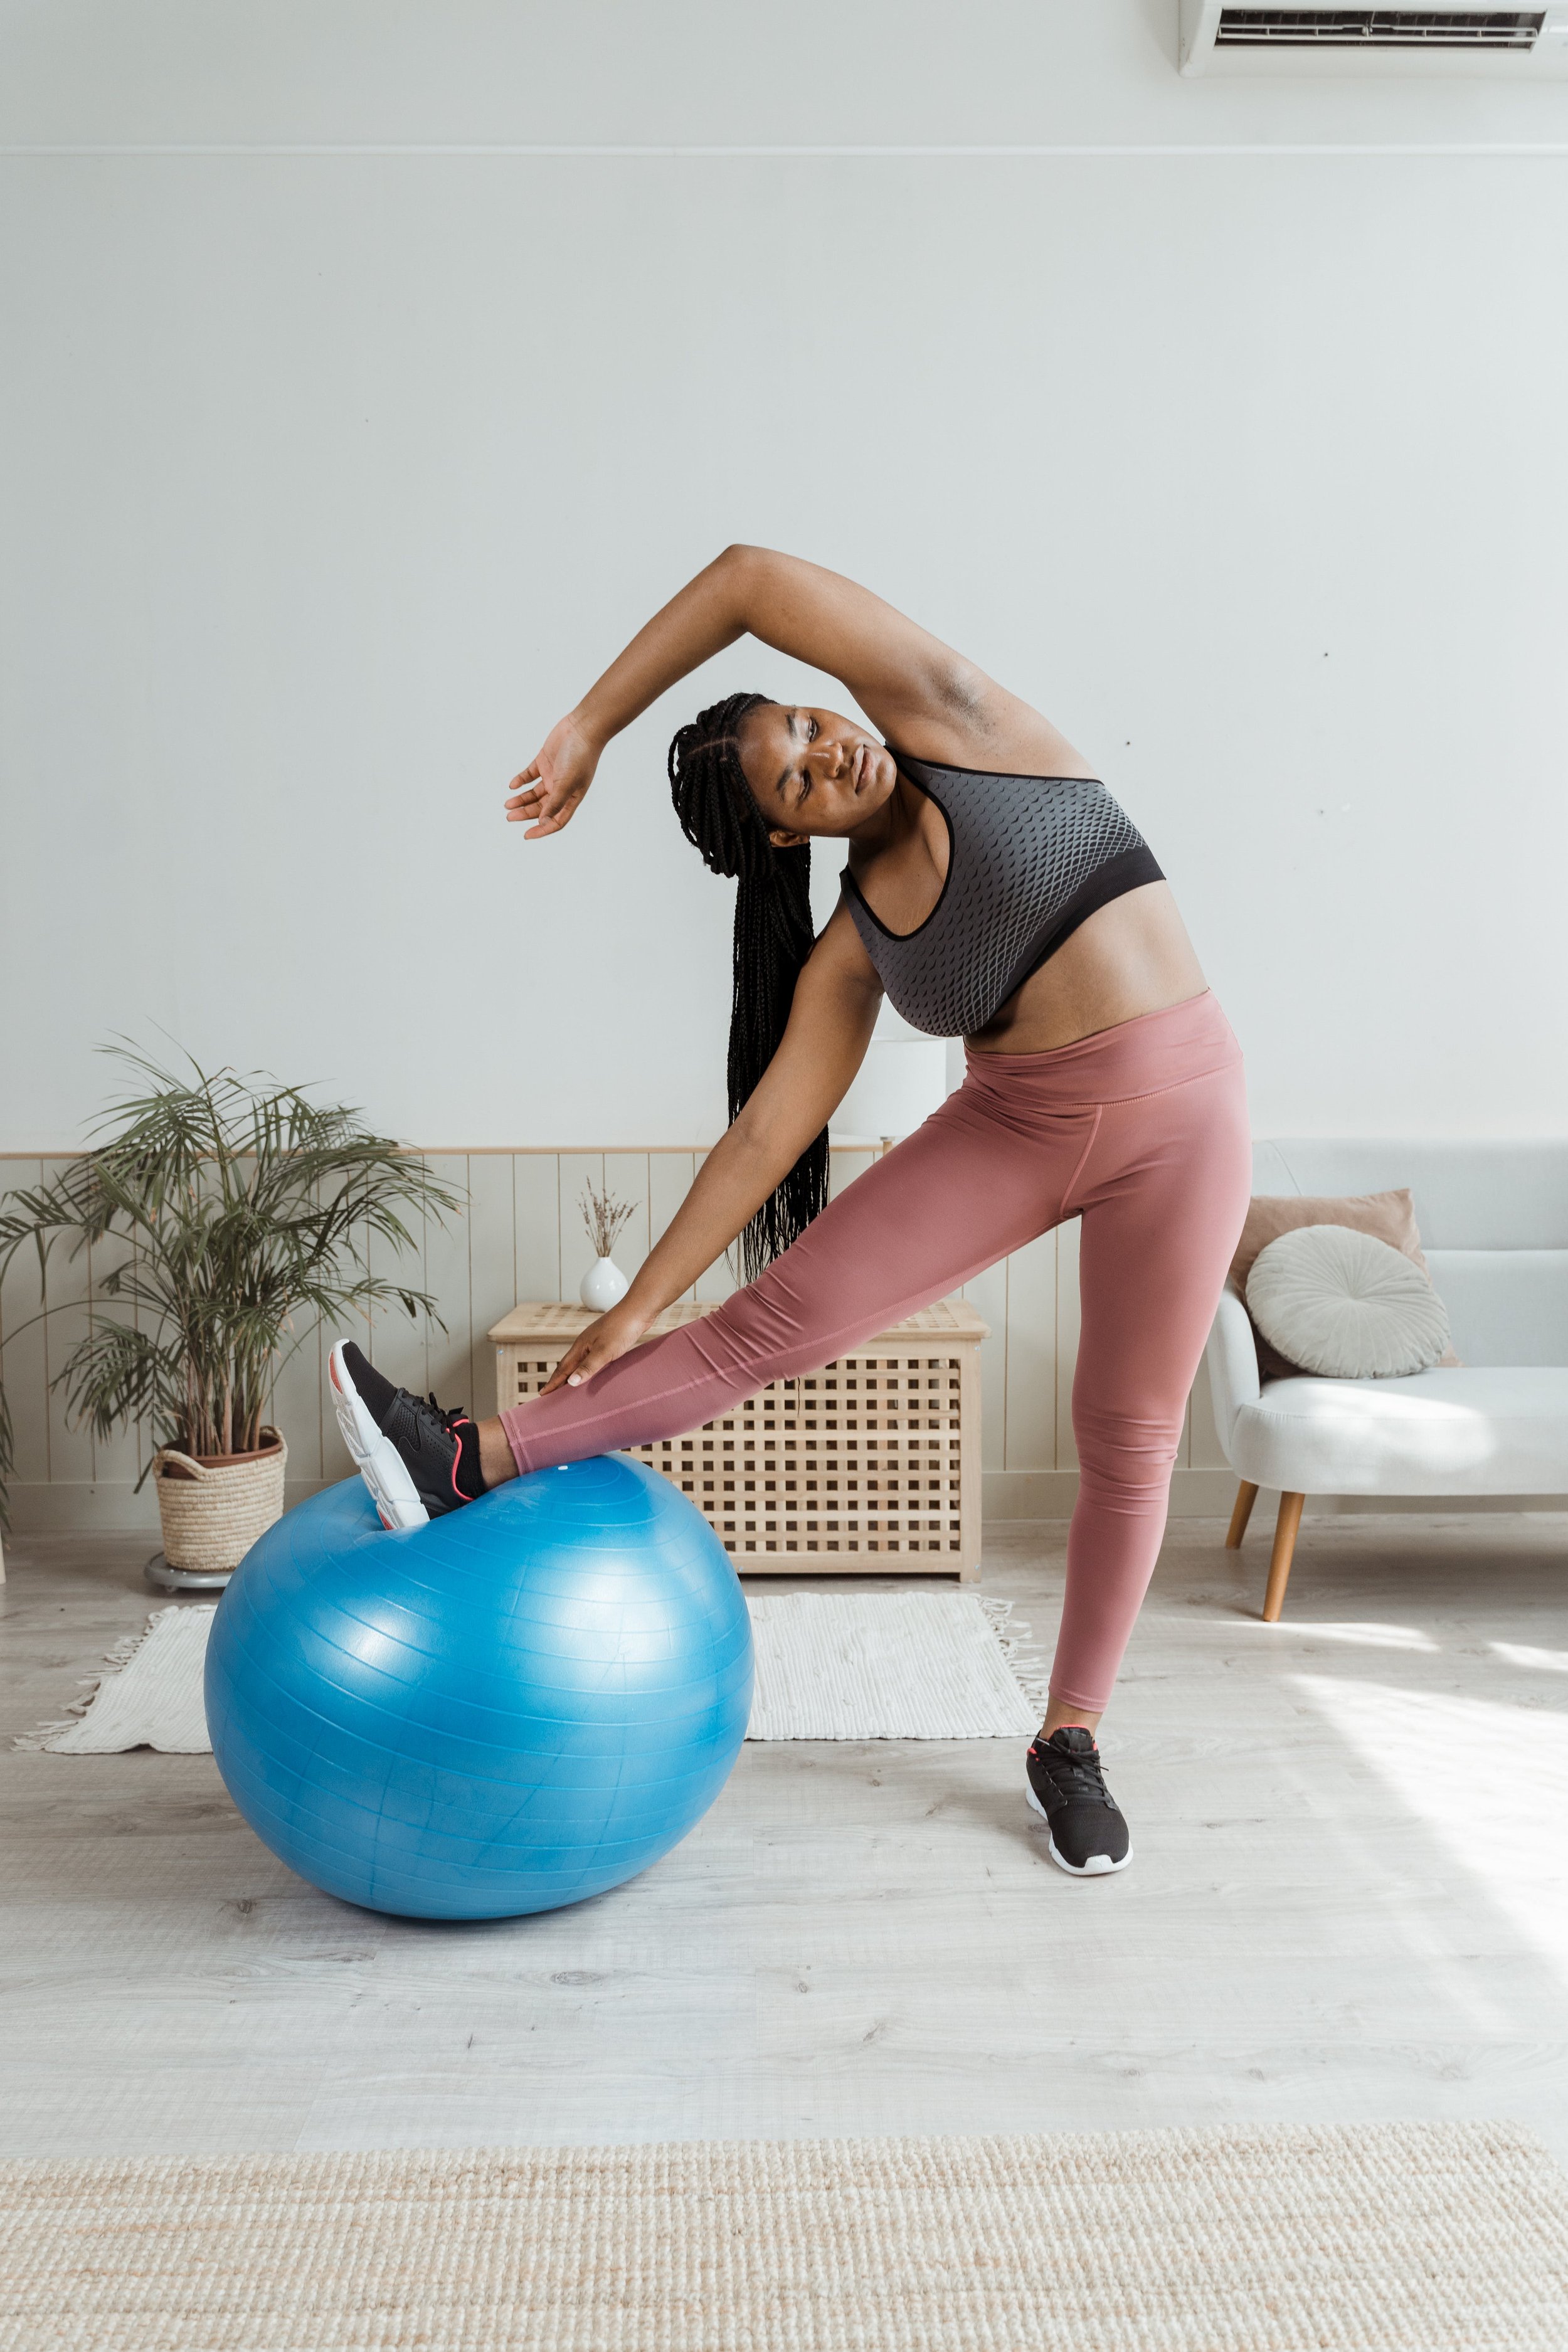 You Should Know About Yoga Ball Before Yoga Ball Excerises – TOPLUS